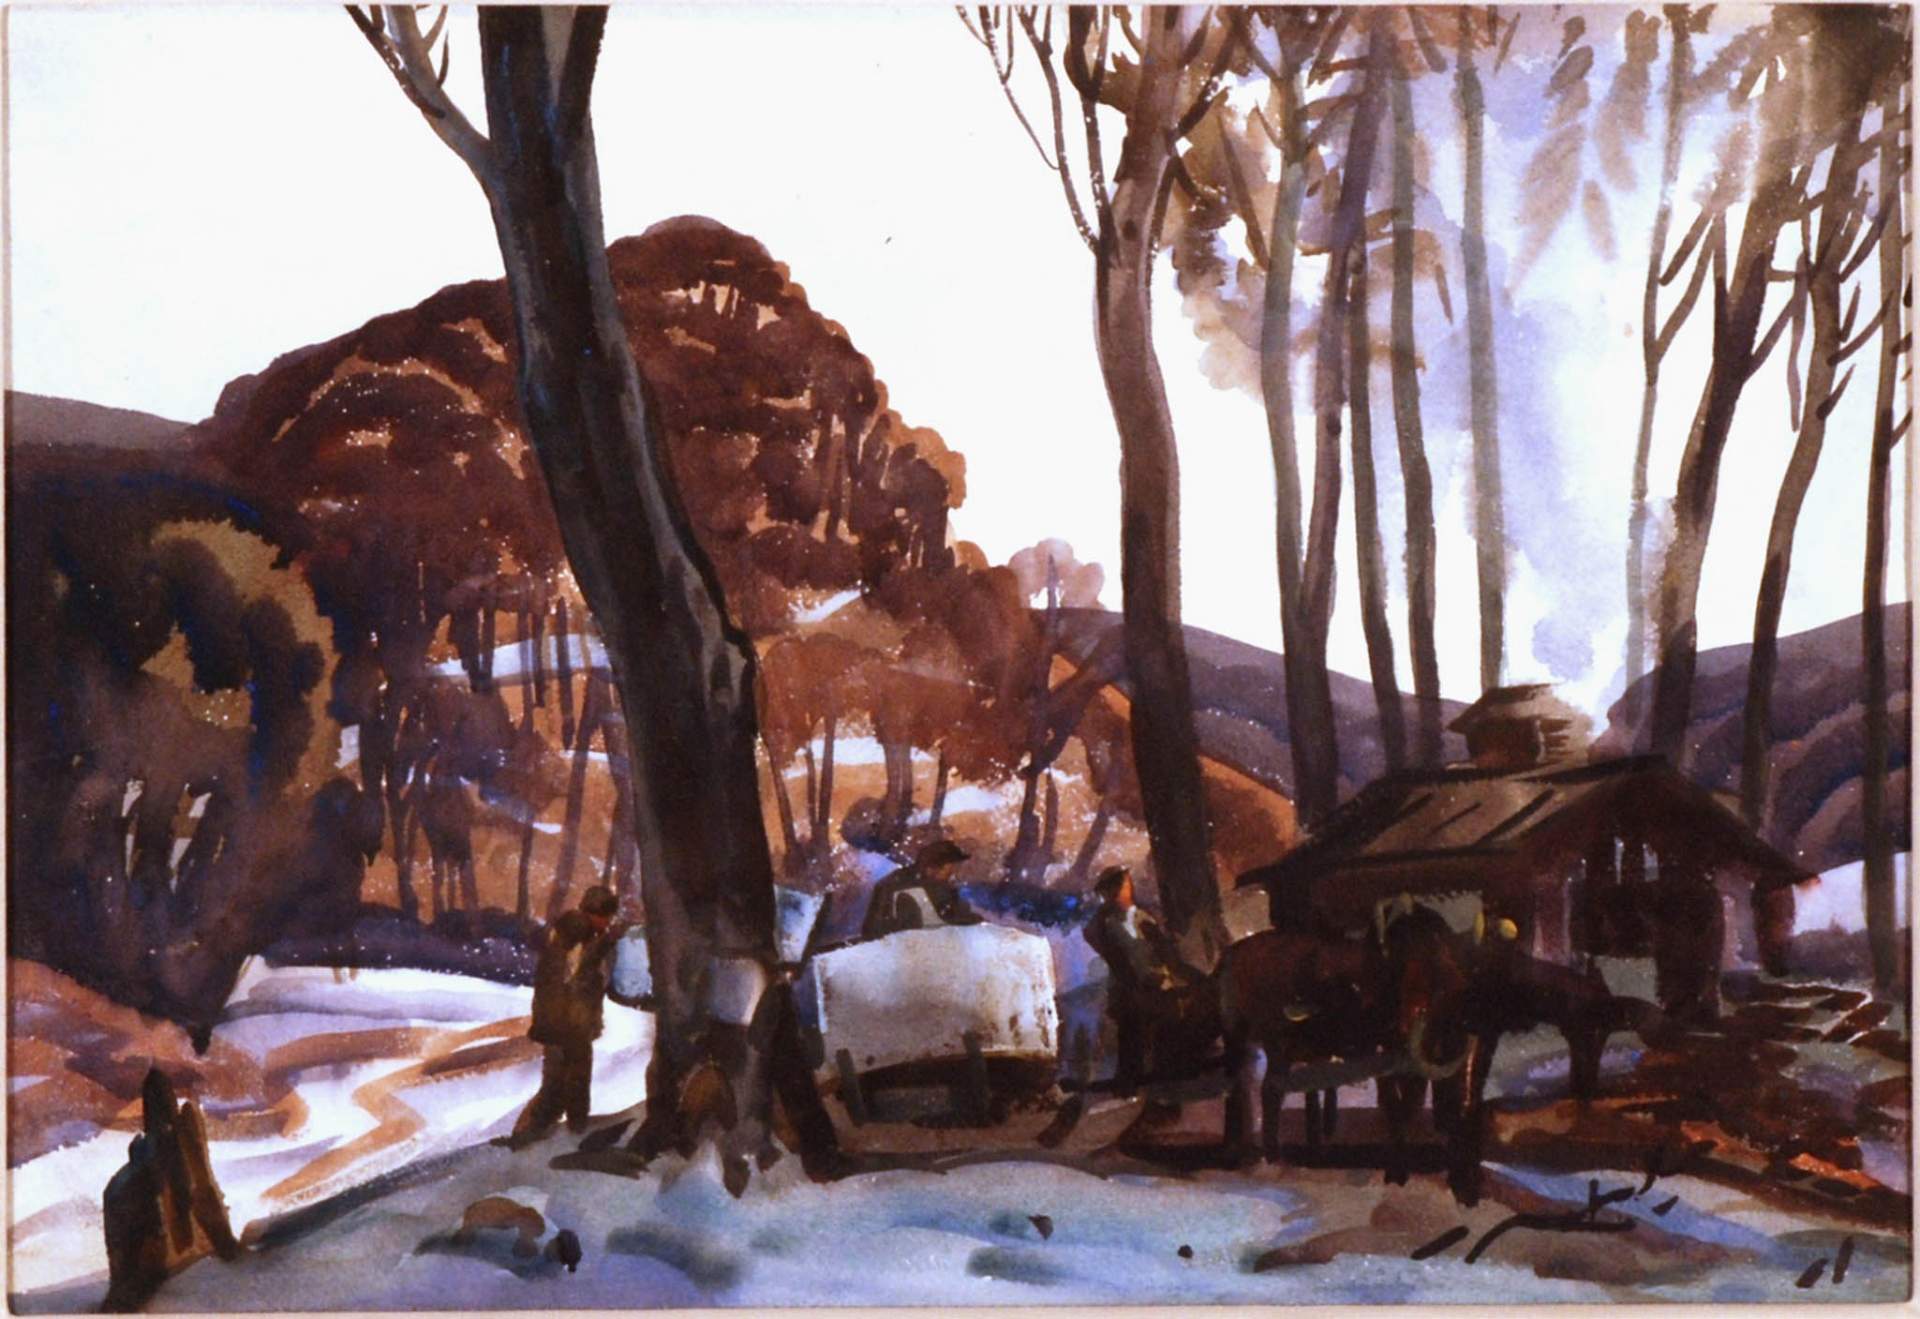 Roots: Burchfield’s Early Subjects, Themes and Influences